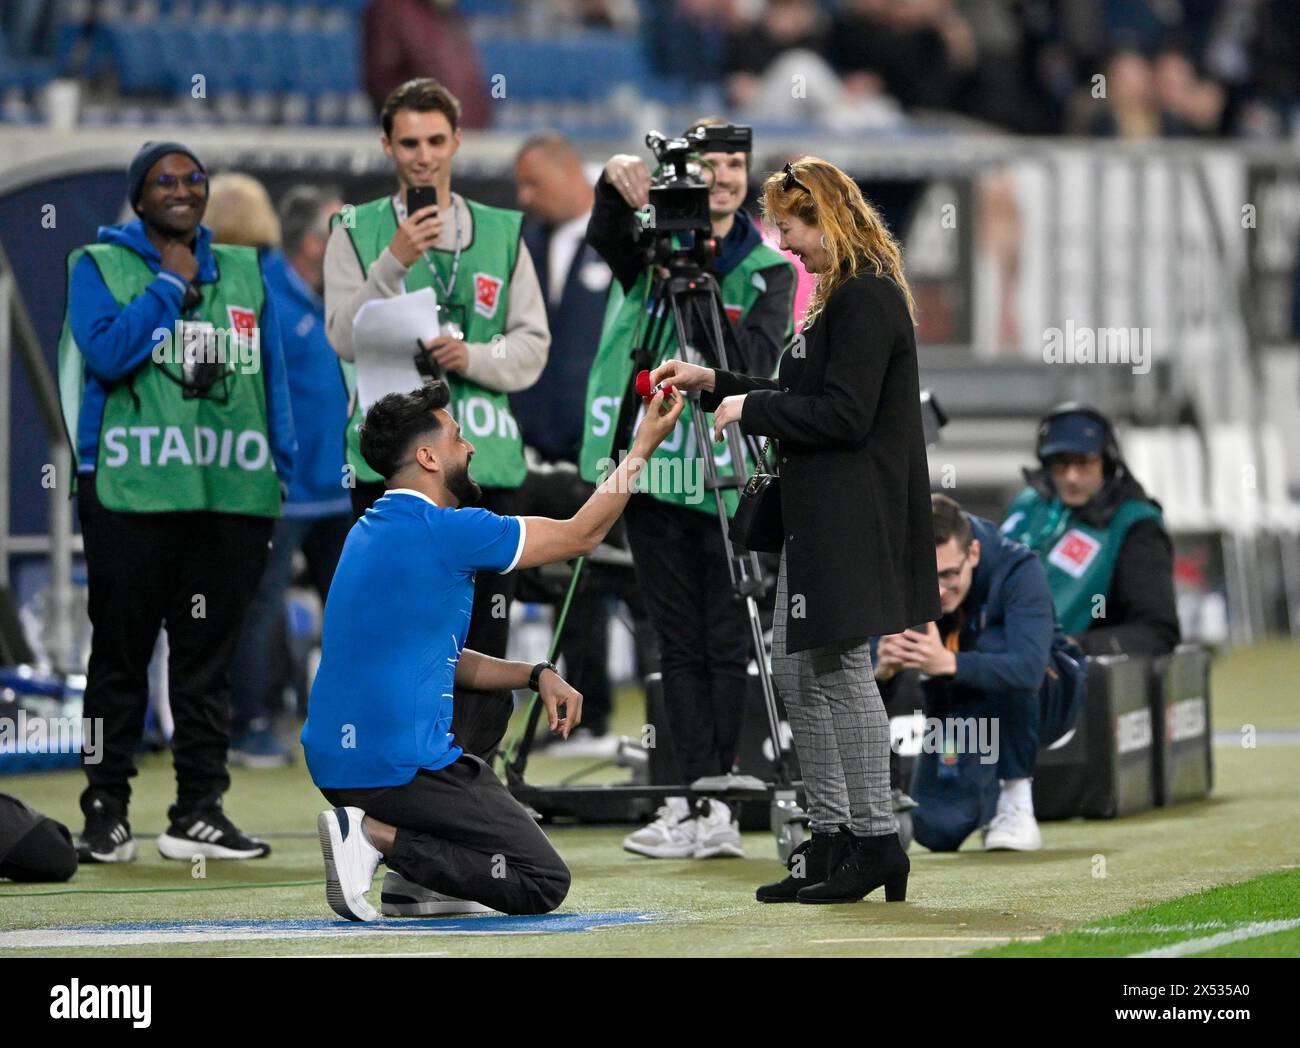 Marriage proposal in the stadium in front of TV cameras, Hoffenheim fan kneels in front of girlfriend and asks her to marry him, hands over rings Stock Photo